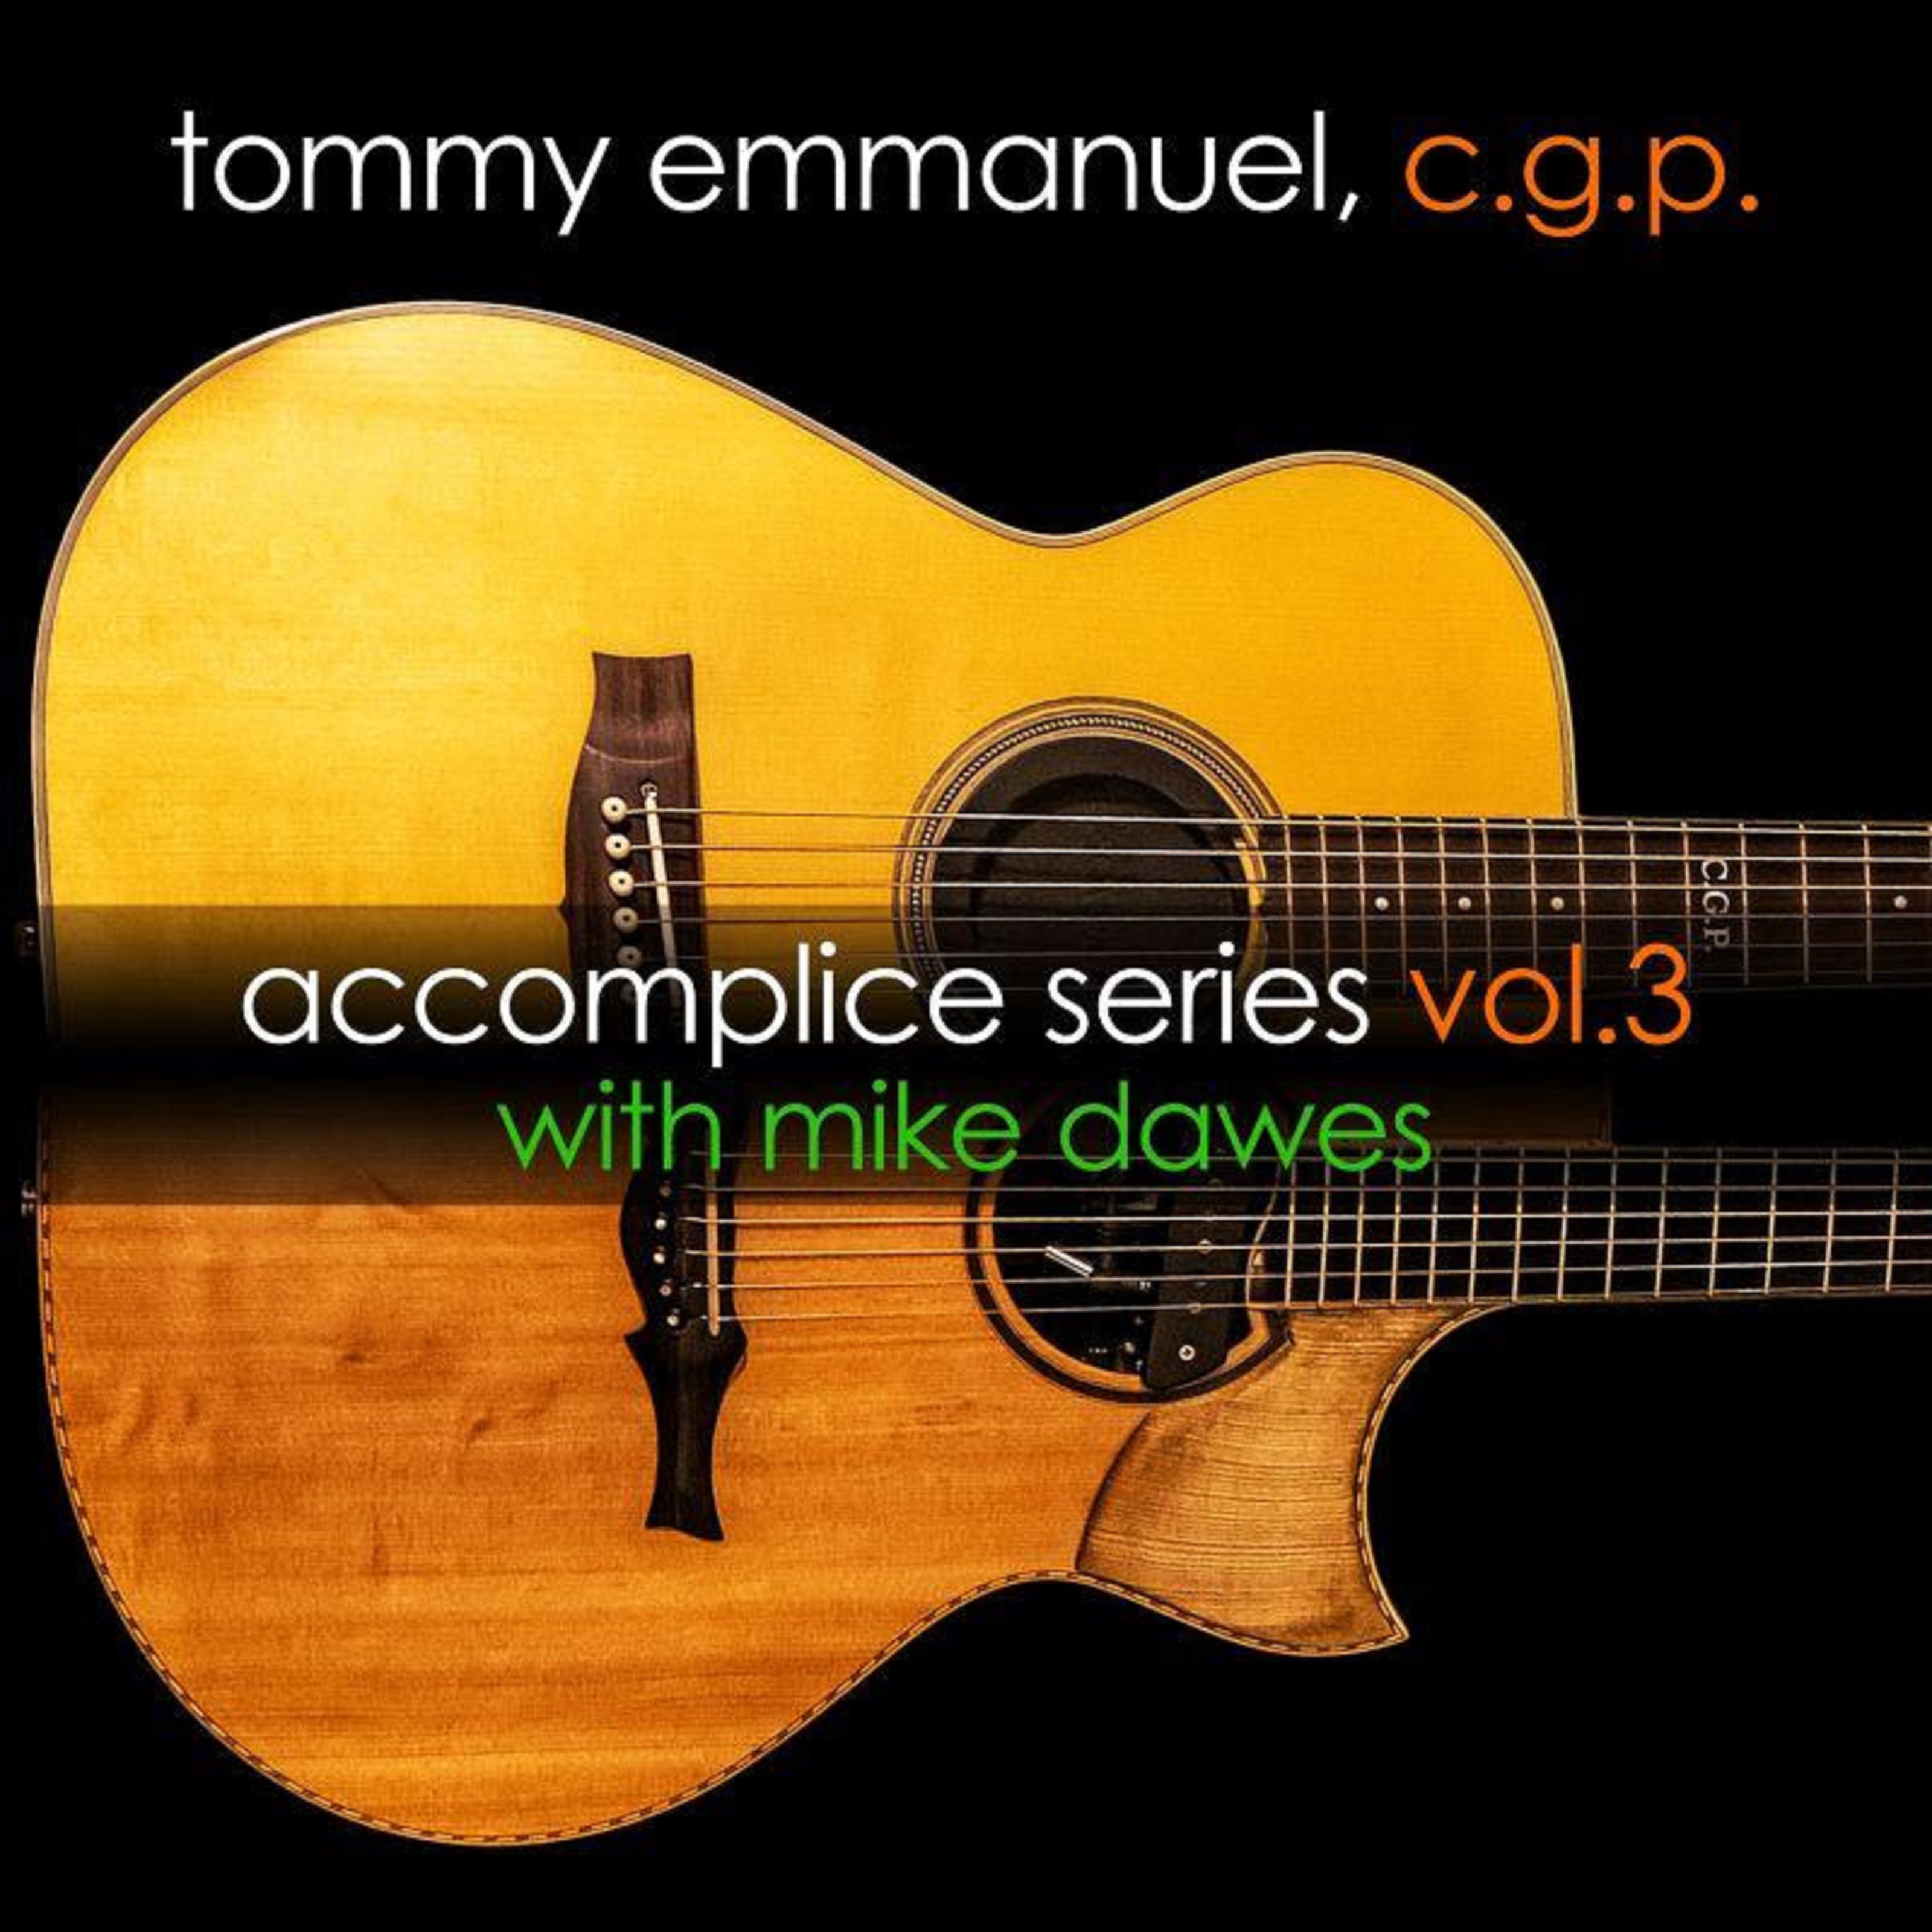 TOMMY EMMANUEL With Mike Dawes Roll Out All-Instrumental Reimagining Of “Be My Mistake” By The 1975